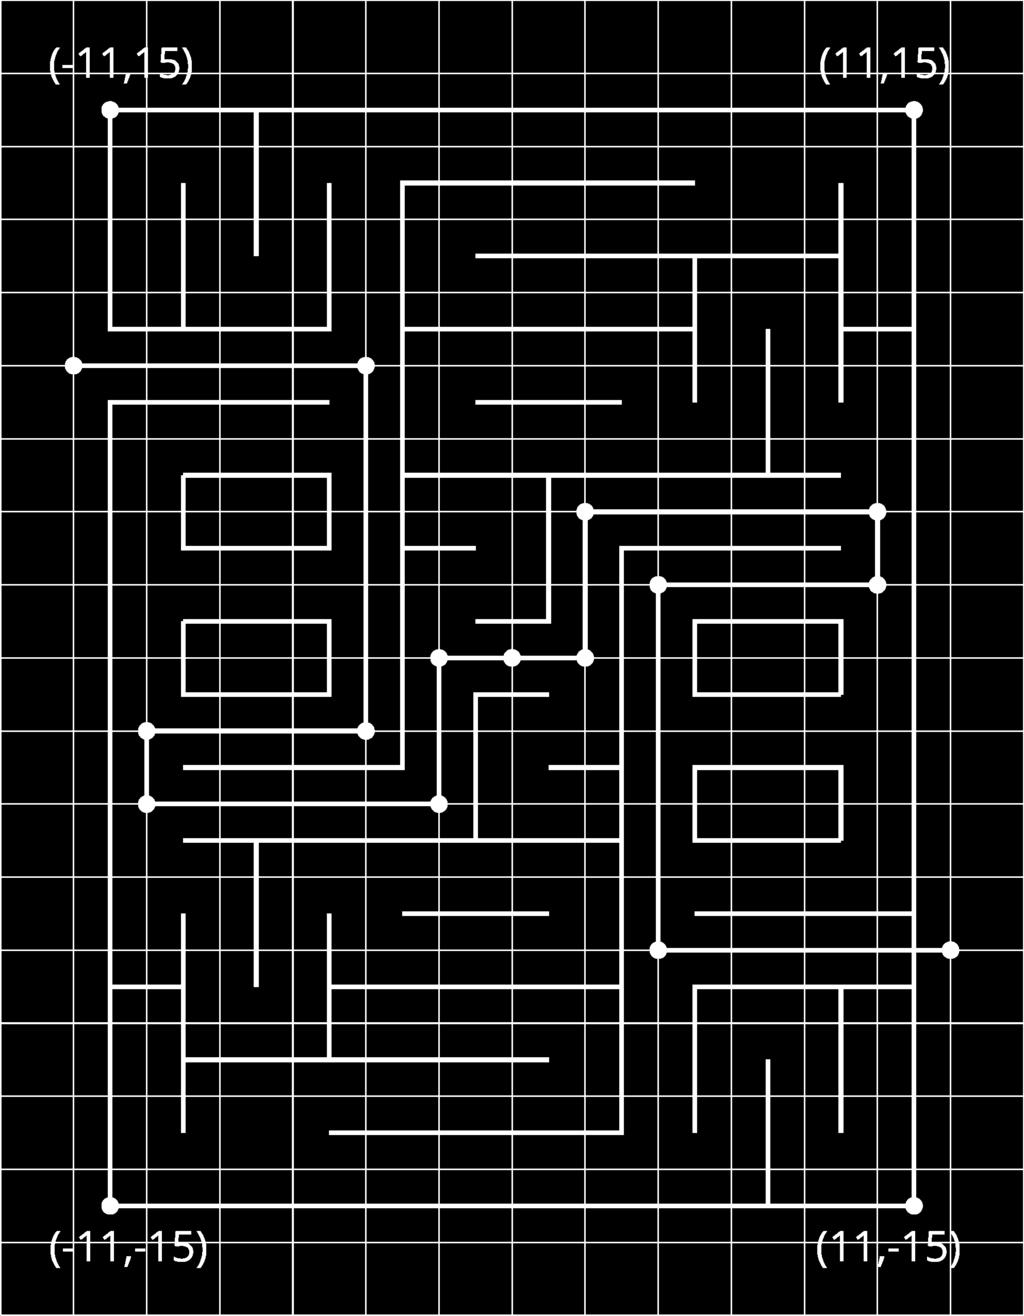 15.3: Four Quadrants of A-Maze-ing m.openup.org//6-7-15-3 1. The following diagram shows Andre s route through a maze. He started from the lower right entrance. a. What are the coordinates of the first two and the last two points of his route?